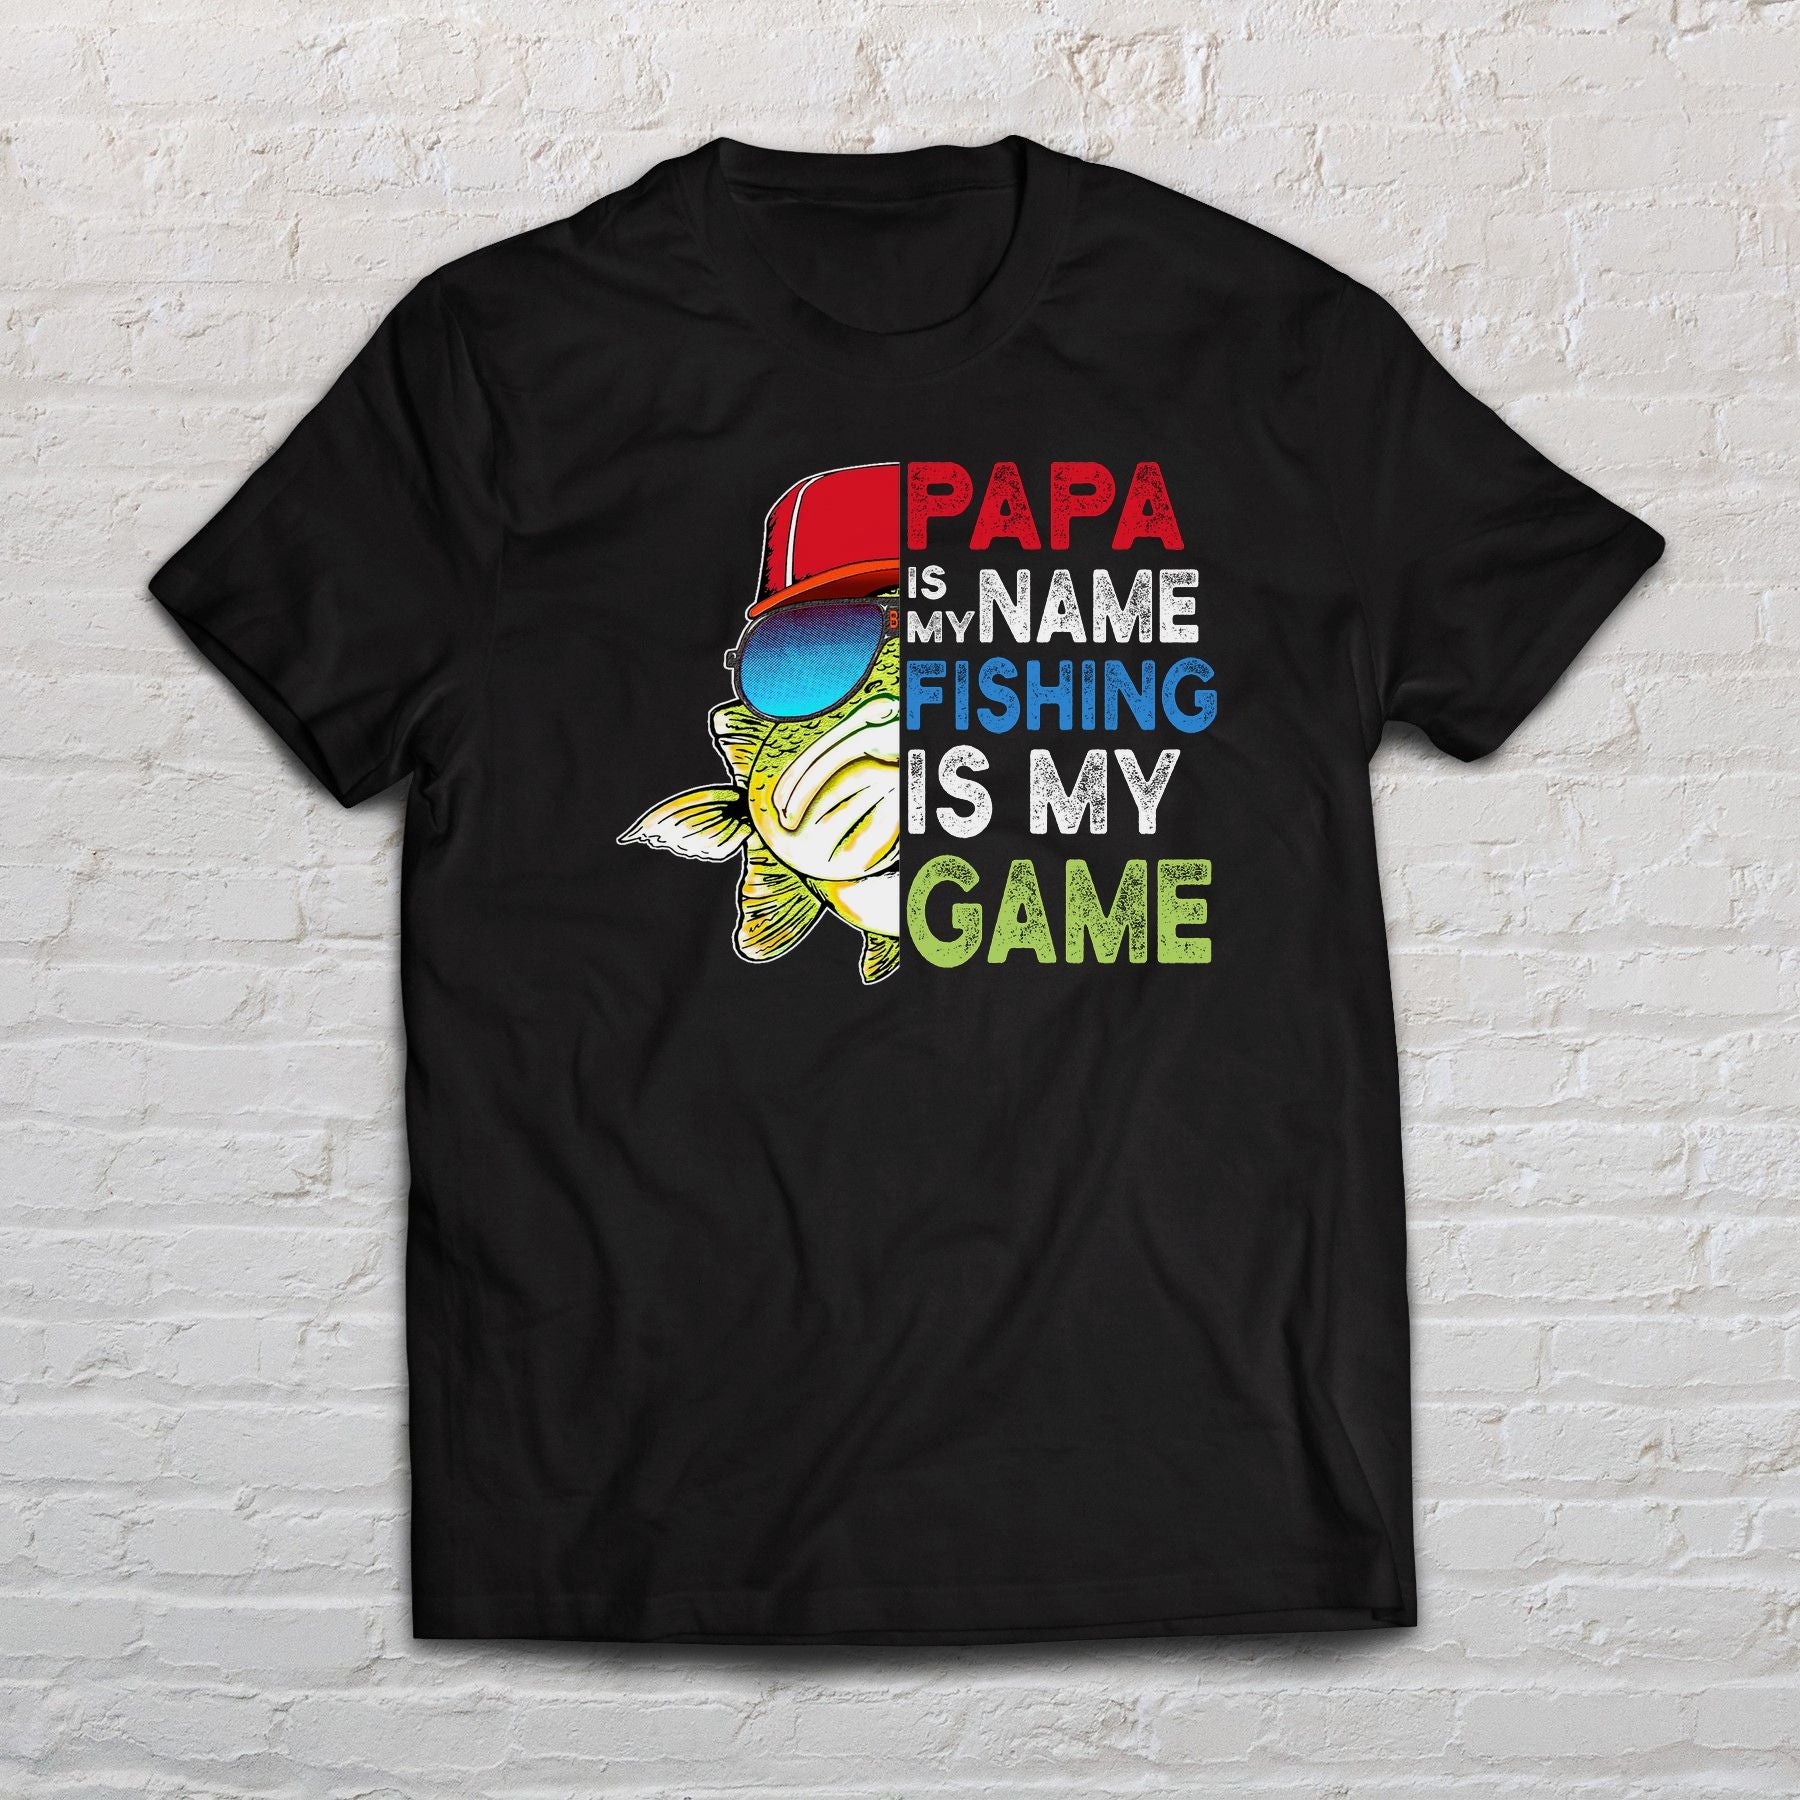 Papa is my name fishing is my game shirt gift for dad Black Navy Dark Heather-Black-Family-Gift-Planet